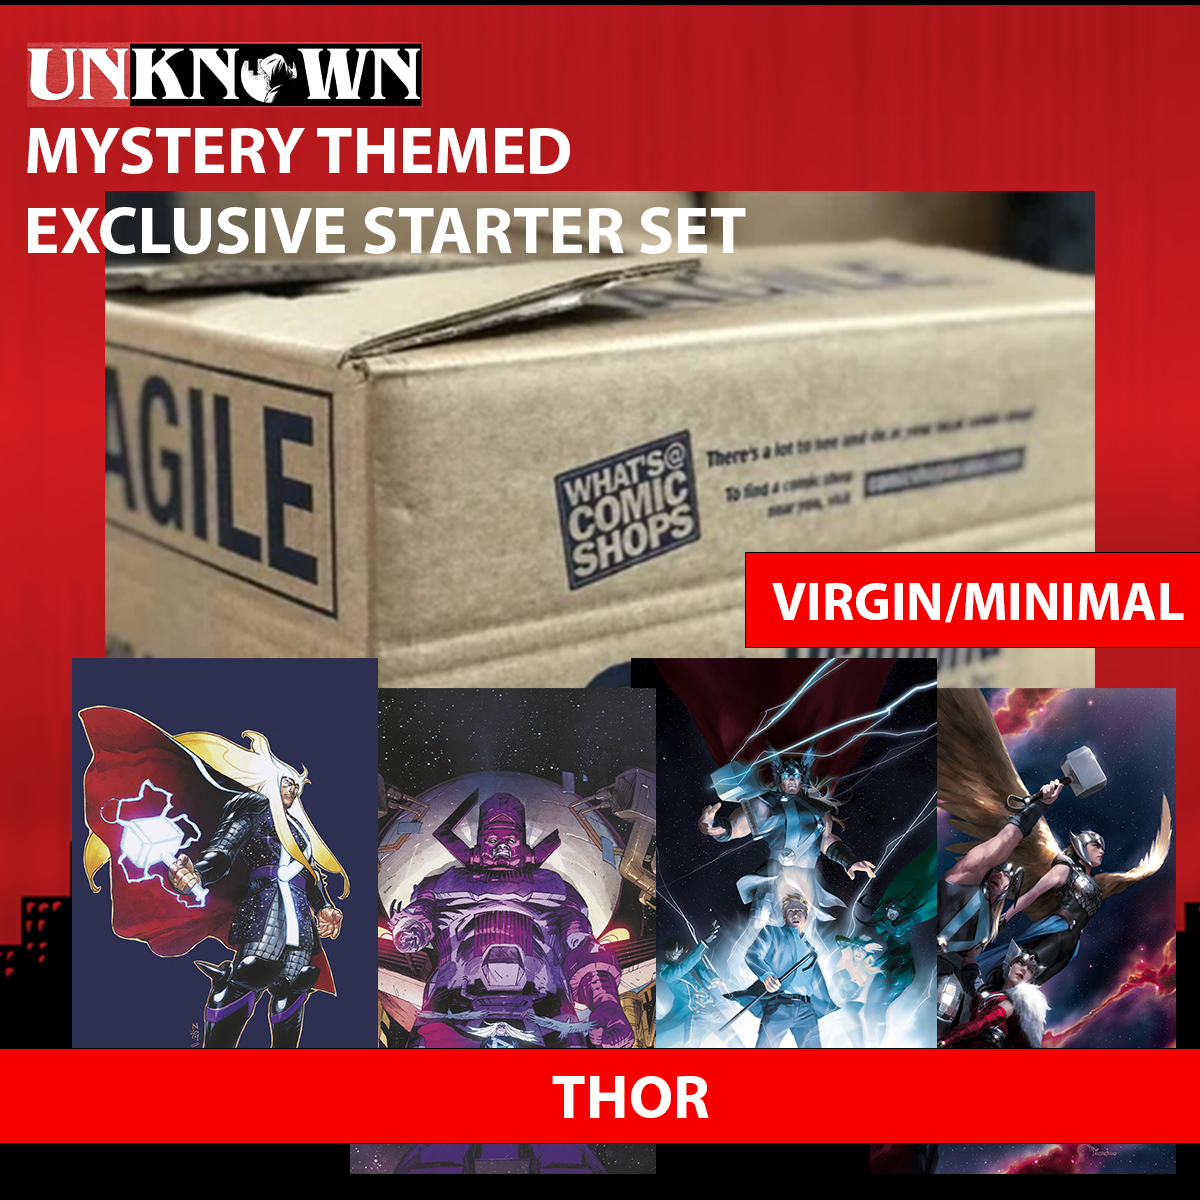 UNKNOWN COMICS MYSTERY THEMED 👉THOR STORE EXCLUSIVE STARTER SET: MIXED CASE OF EXCLUSIVE COMIC BOOKS 👉VIRGIN / MINIMAL ESTIMATED 120-200 COMICS (12/06/2023)